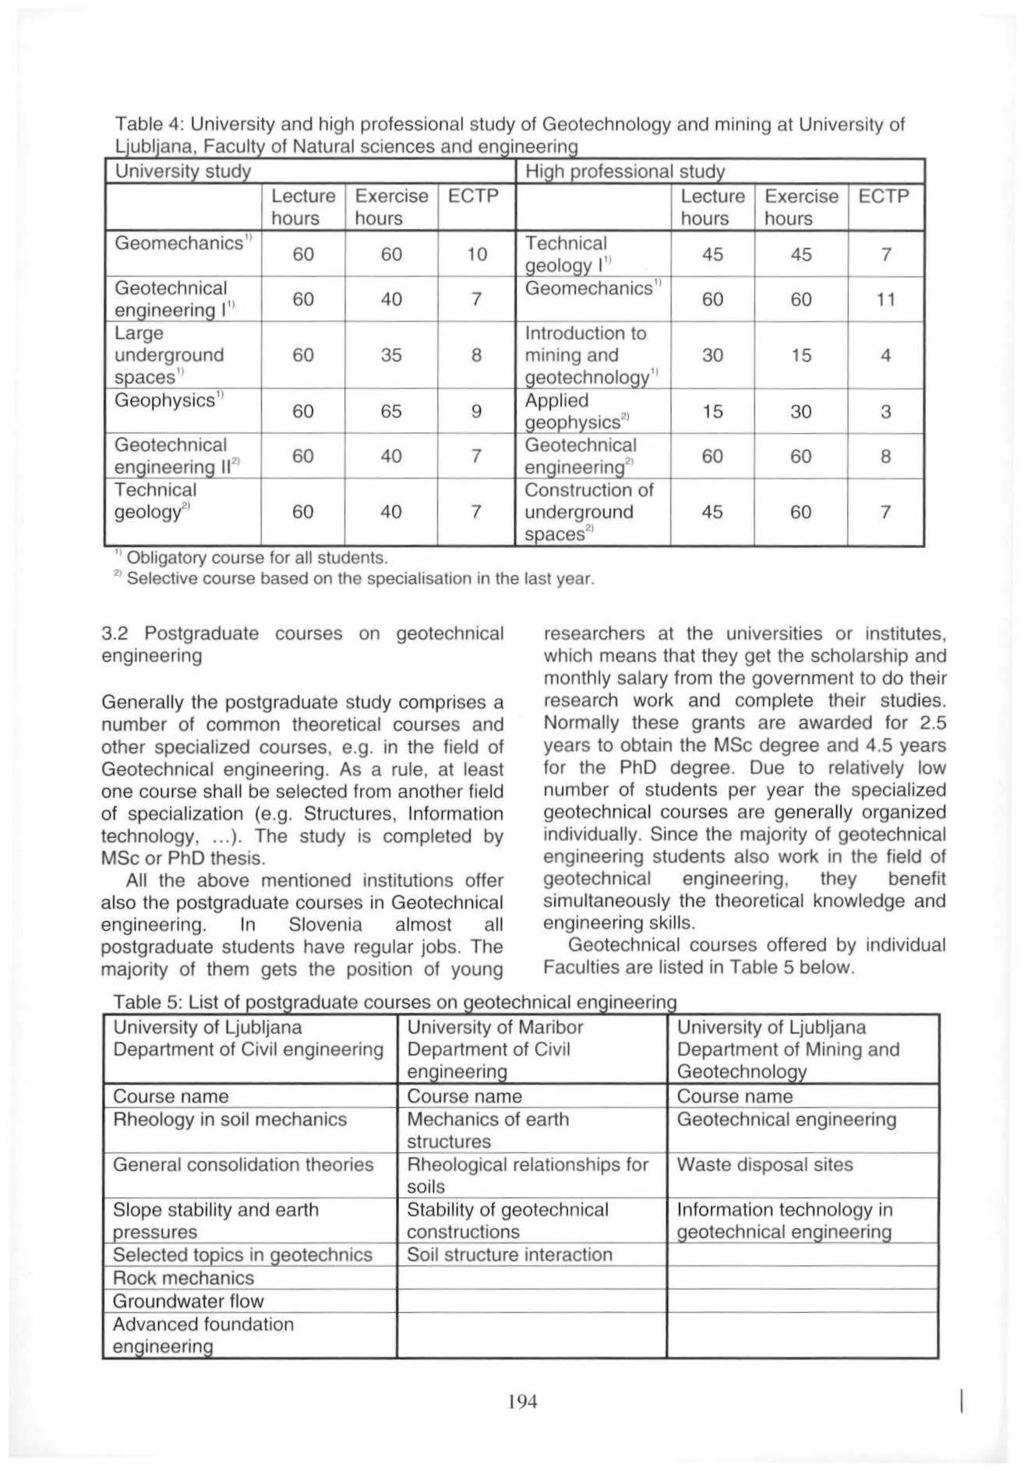 Table : University and high professional study of Geotechnology and mining at University of L.